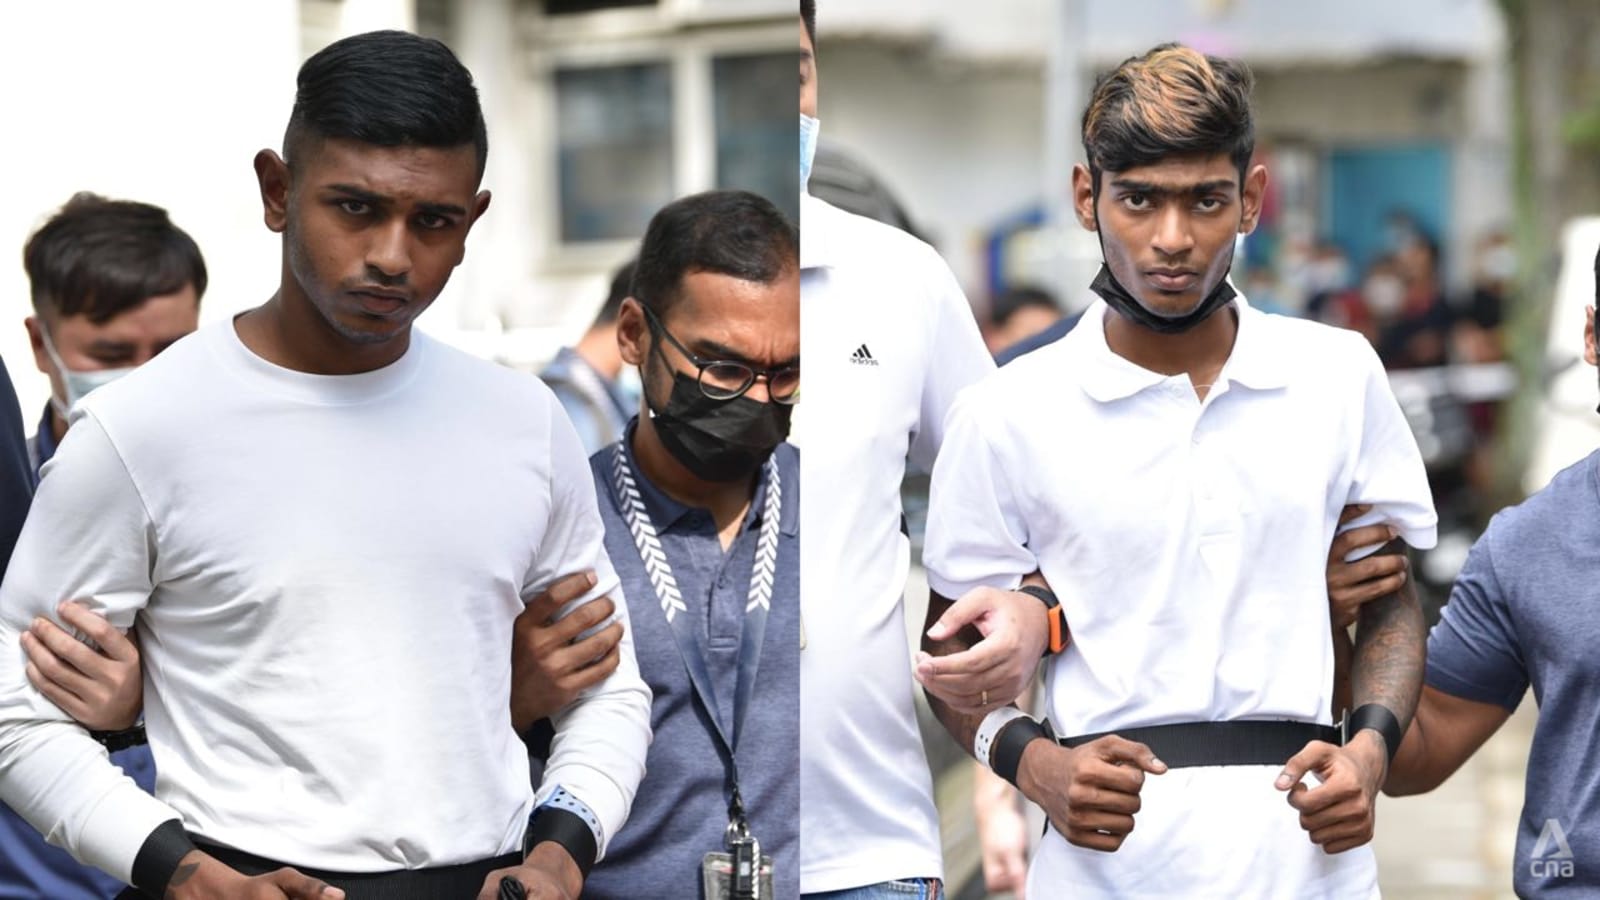 boon-lay-slashing:-two-men-charged-with-causing-hurt-with-a-dangerous-weapon